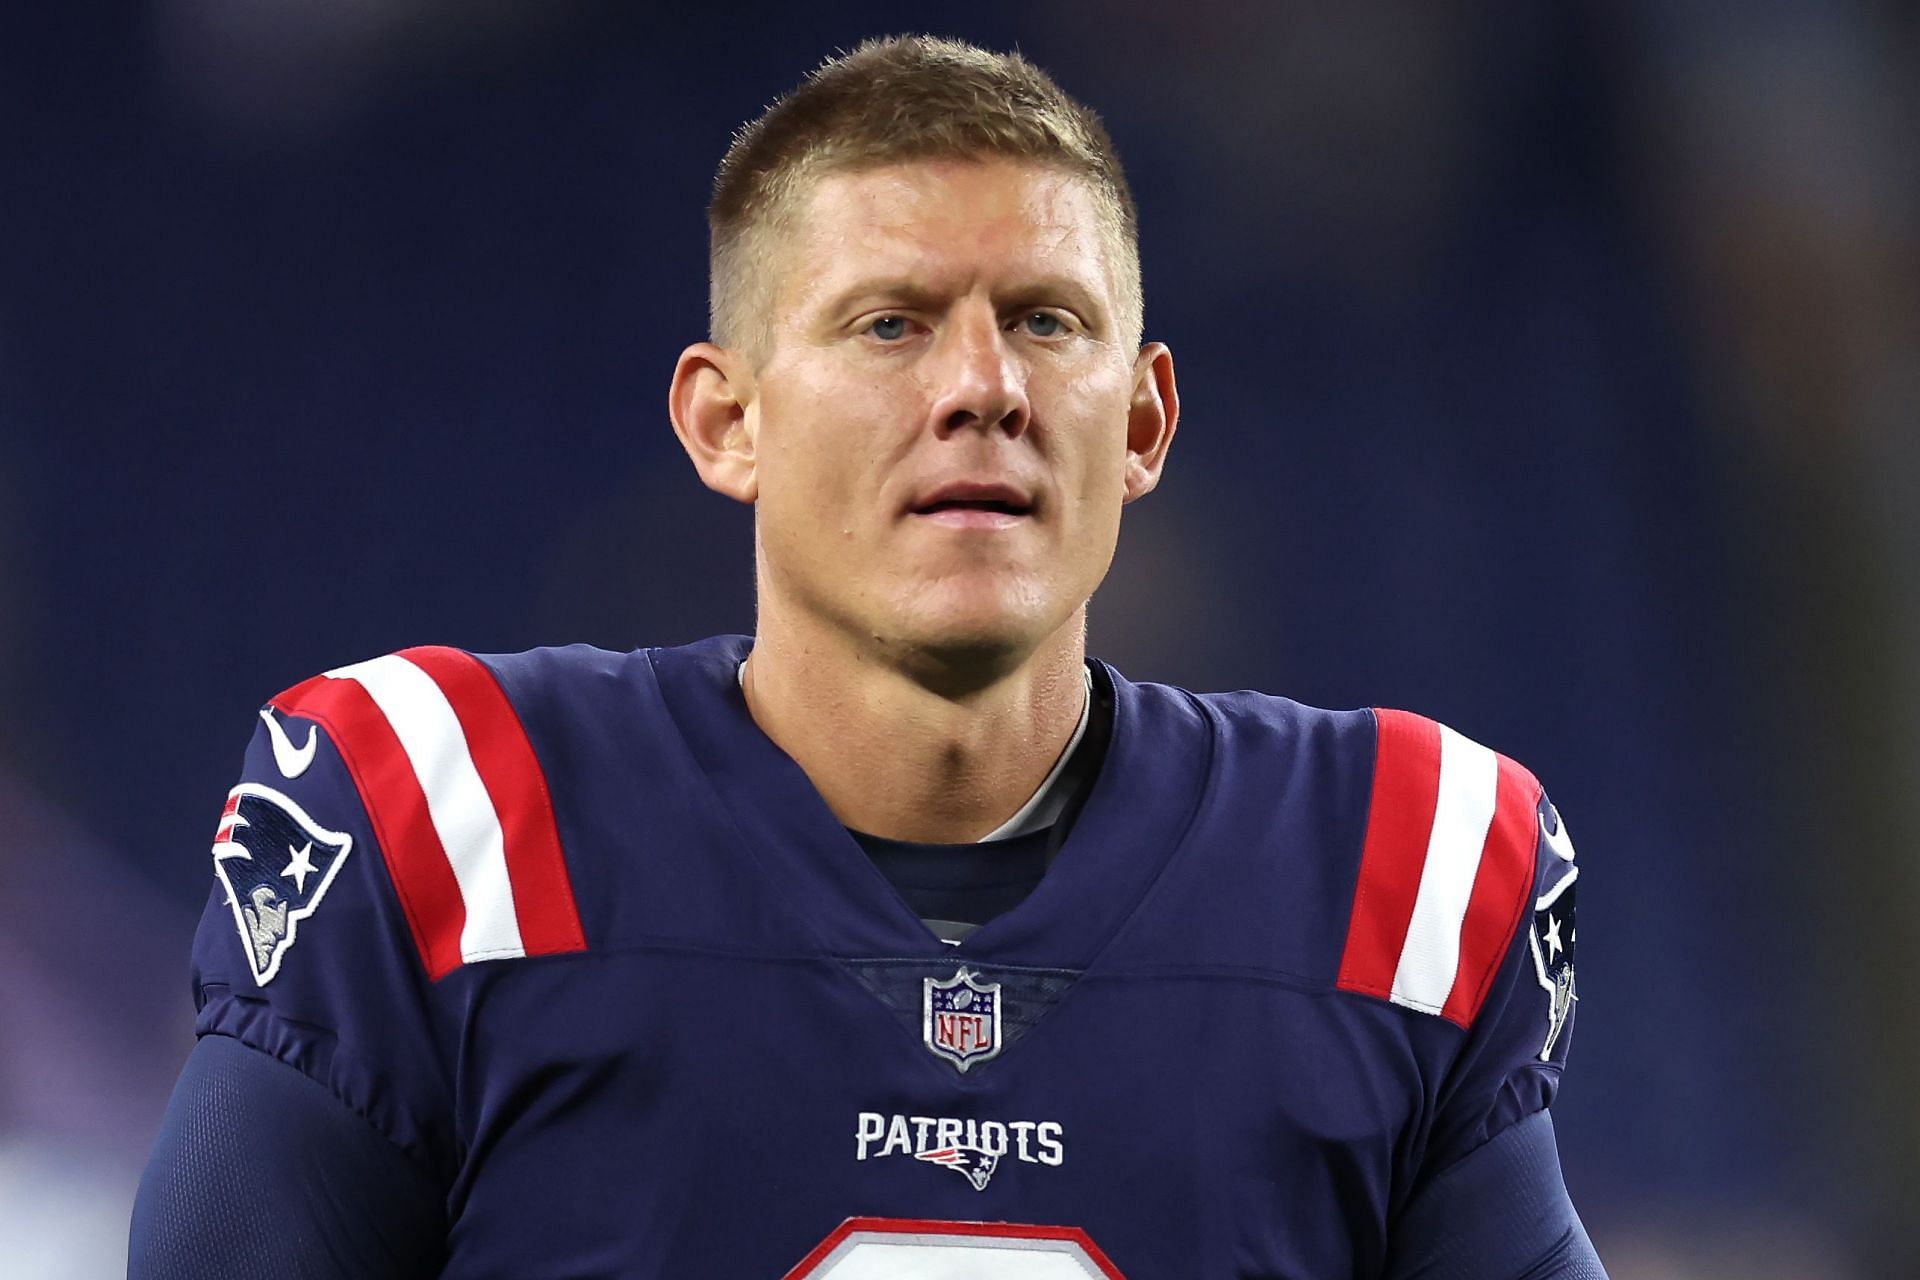 Nick Folk of the New England Patriots will be up against Tyler Bass in Week 13